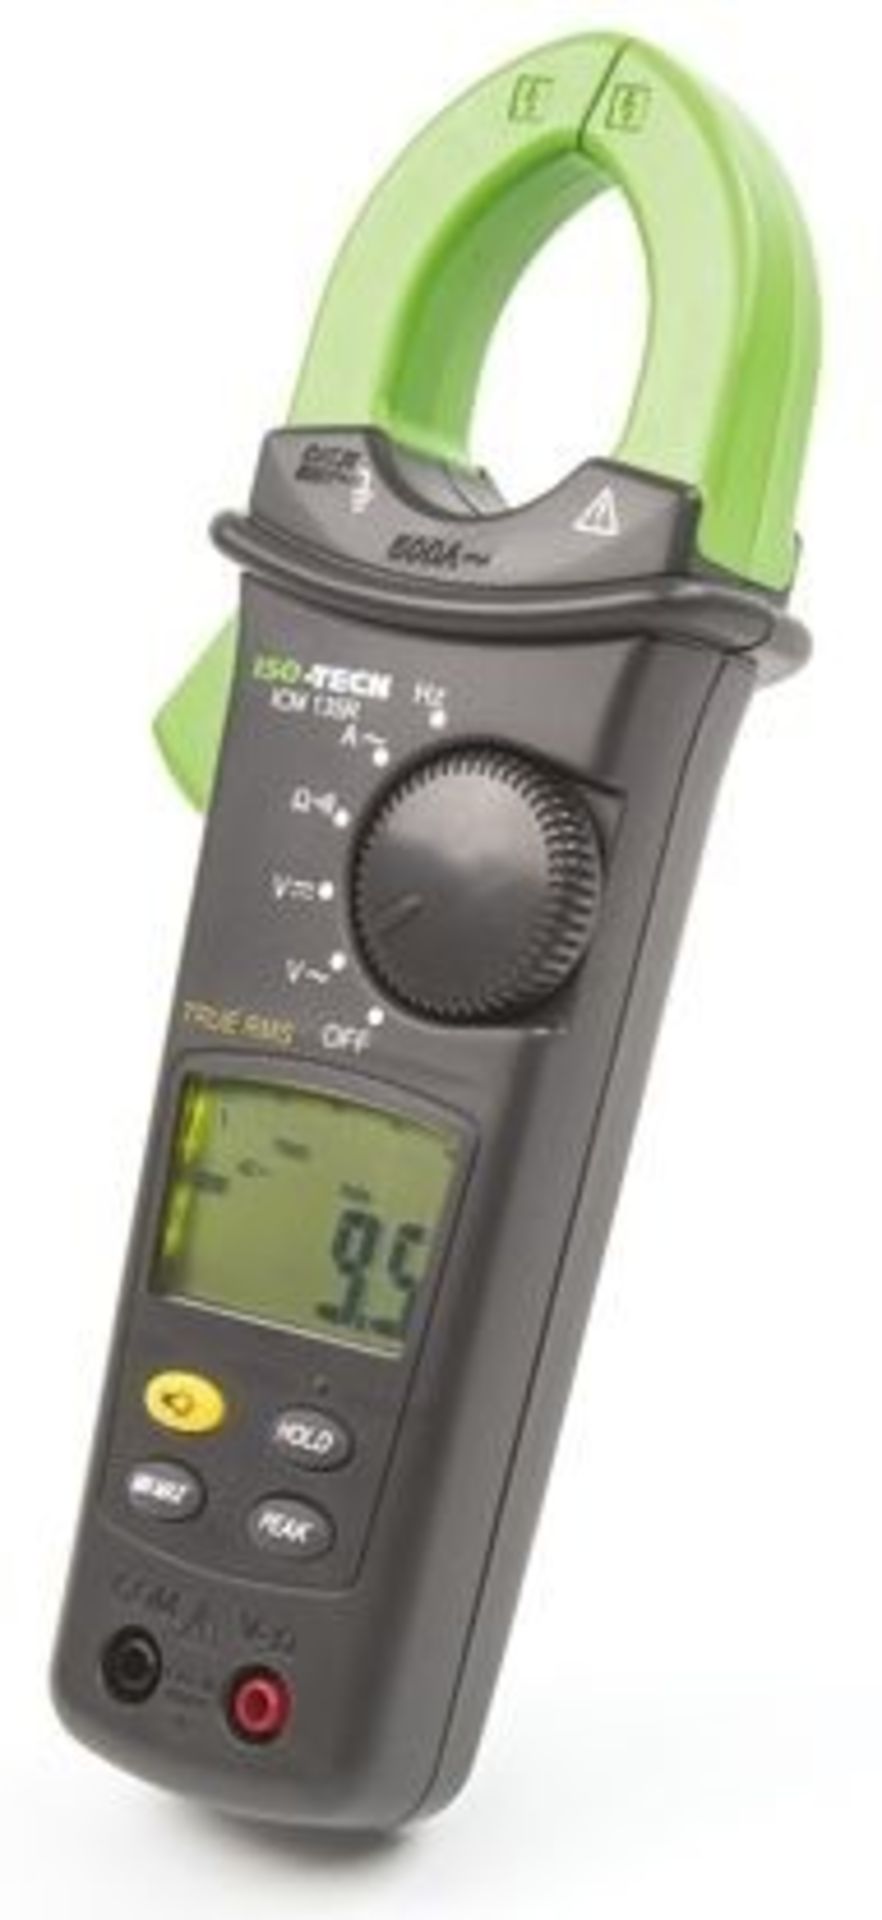 ICM135R Clamp Meter, Max Current 600A ac CAT III 600 V